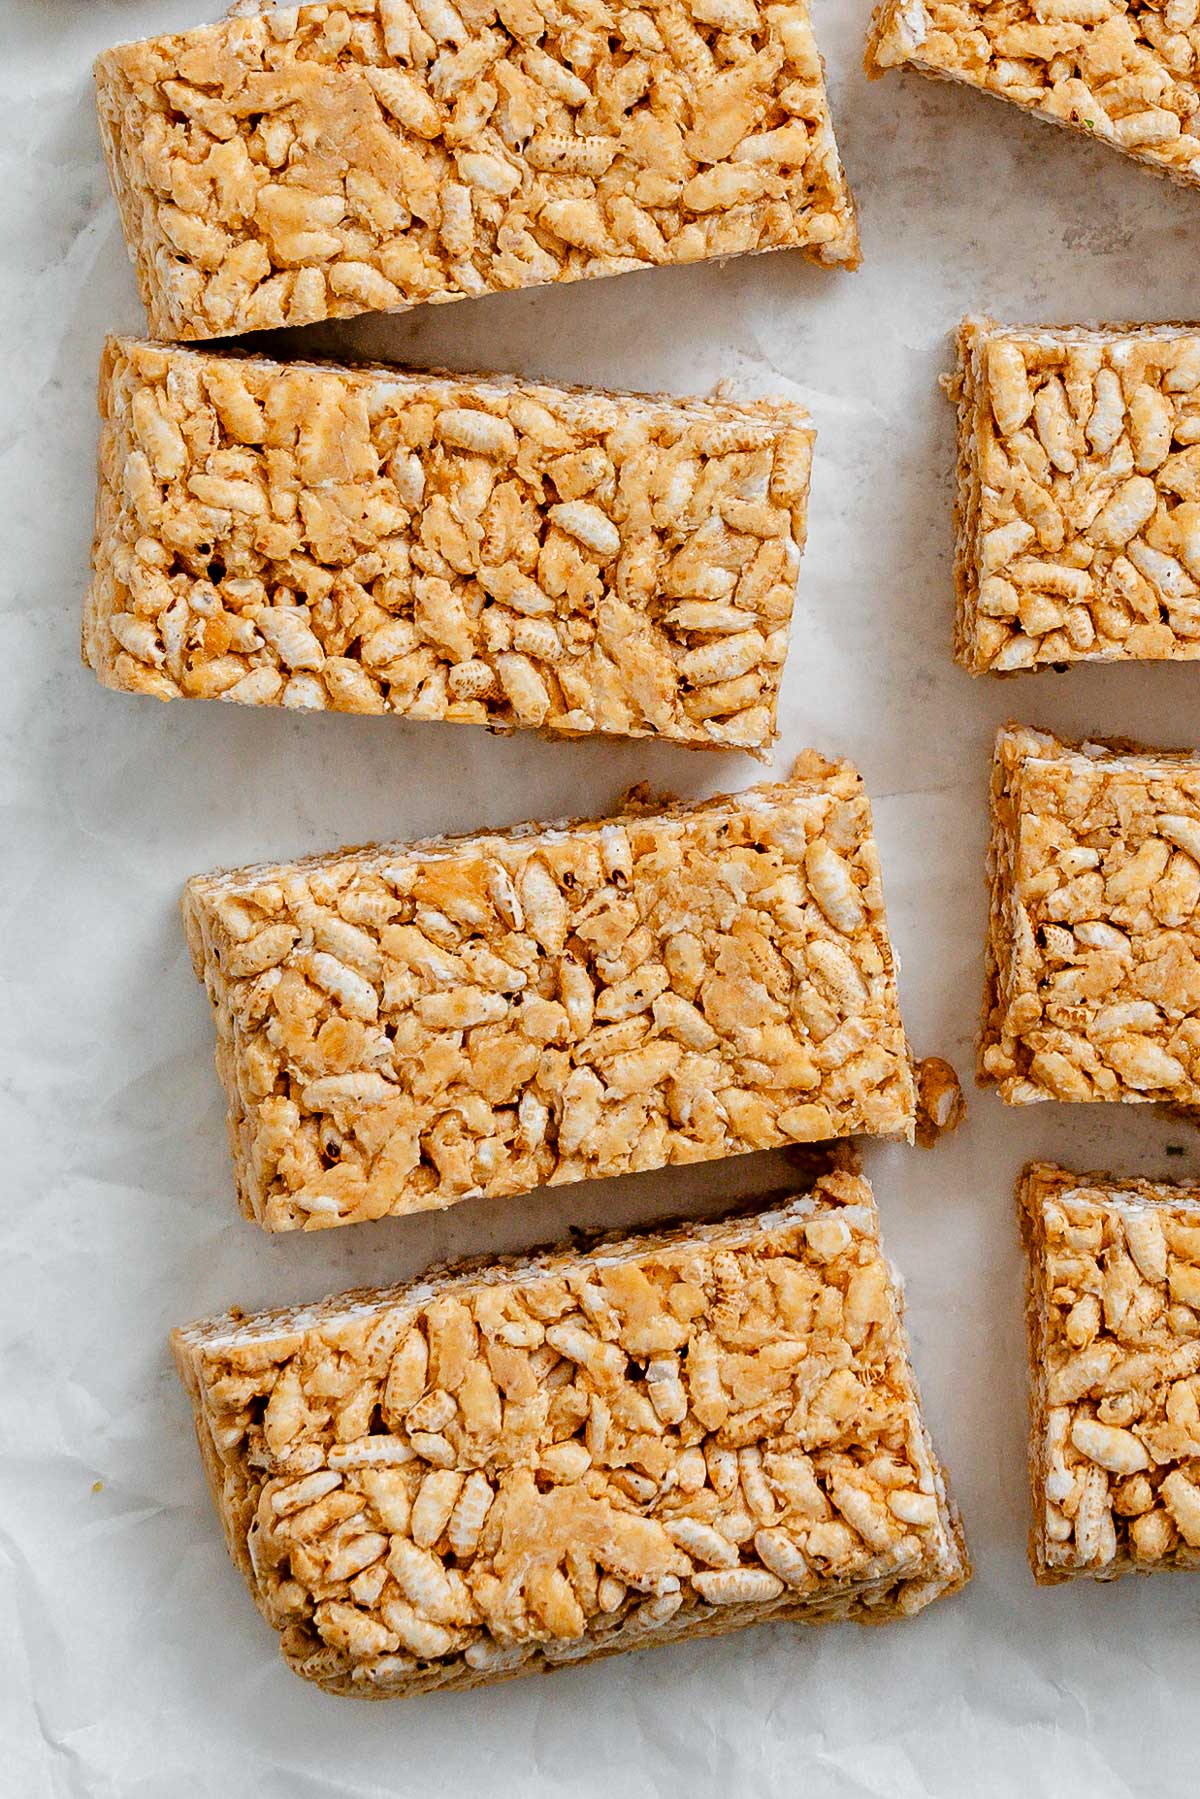 several completed Peanut Butter Rice Krispie Treats against a white surface